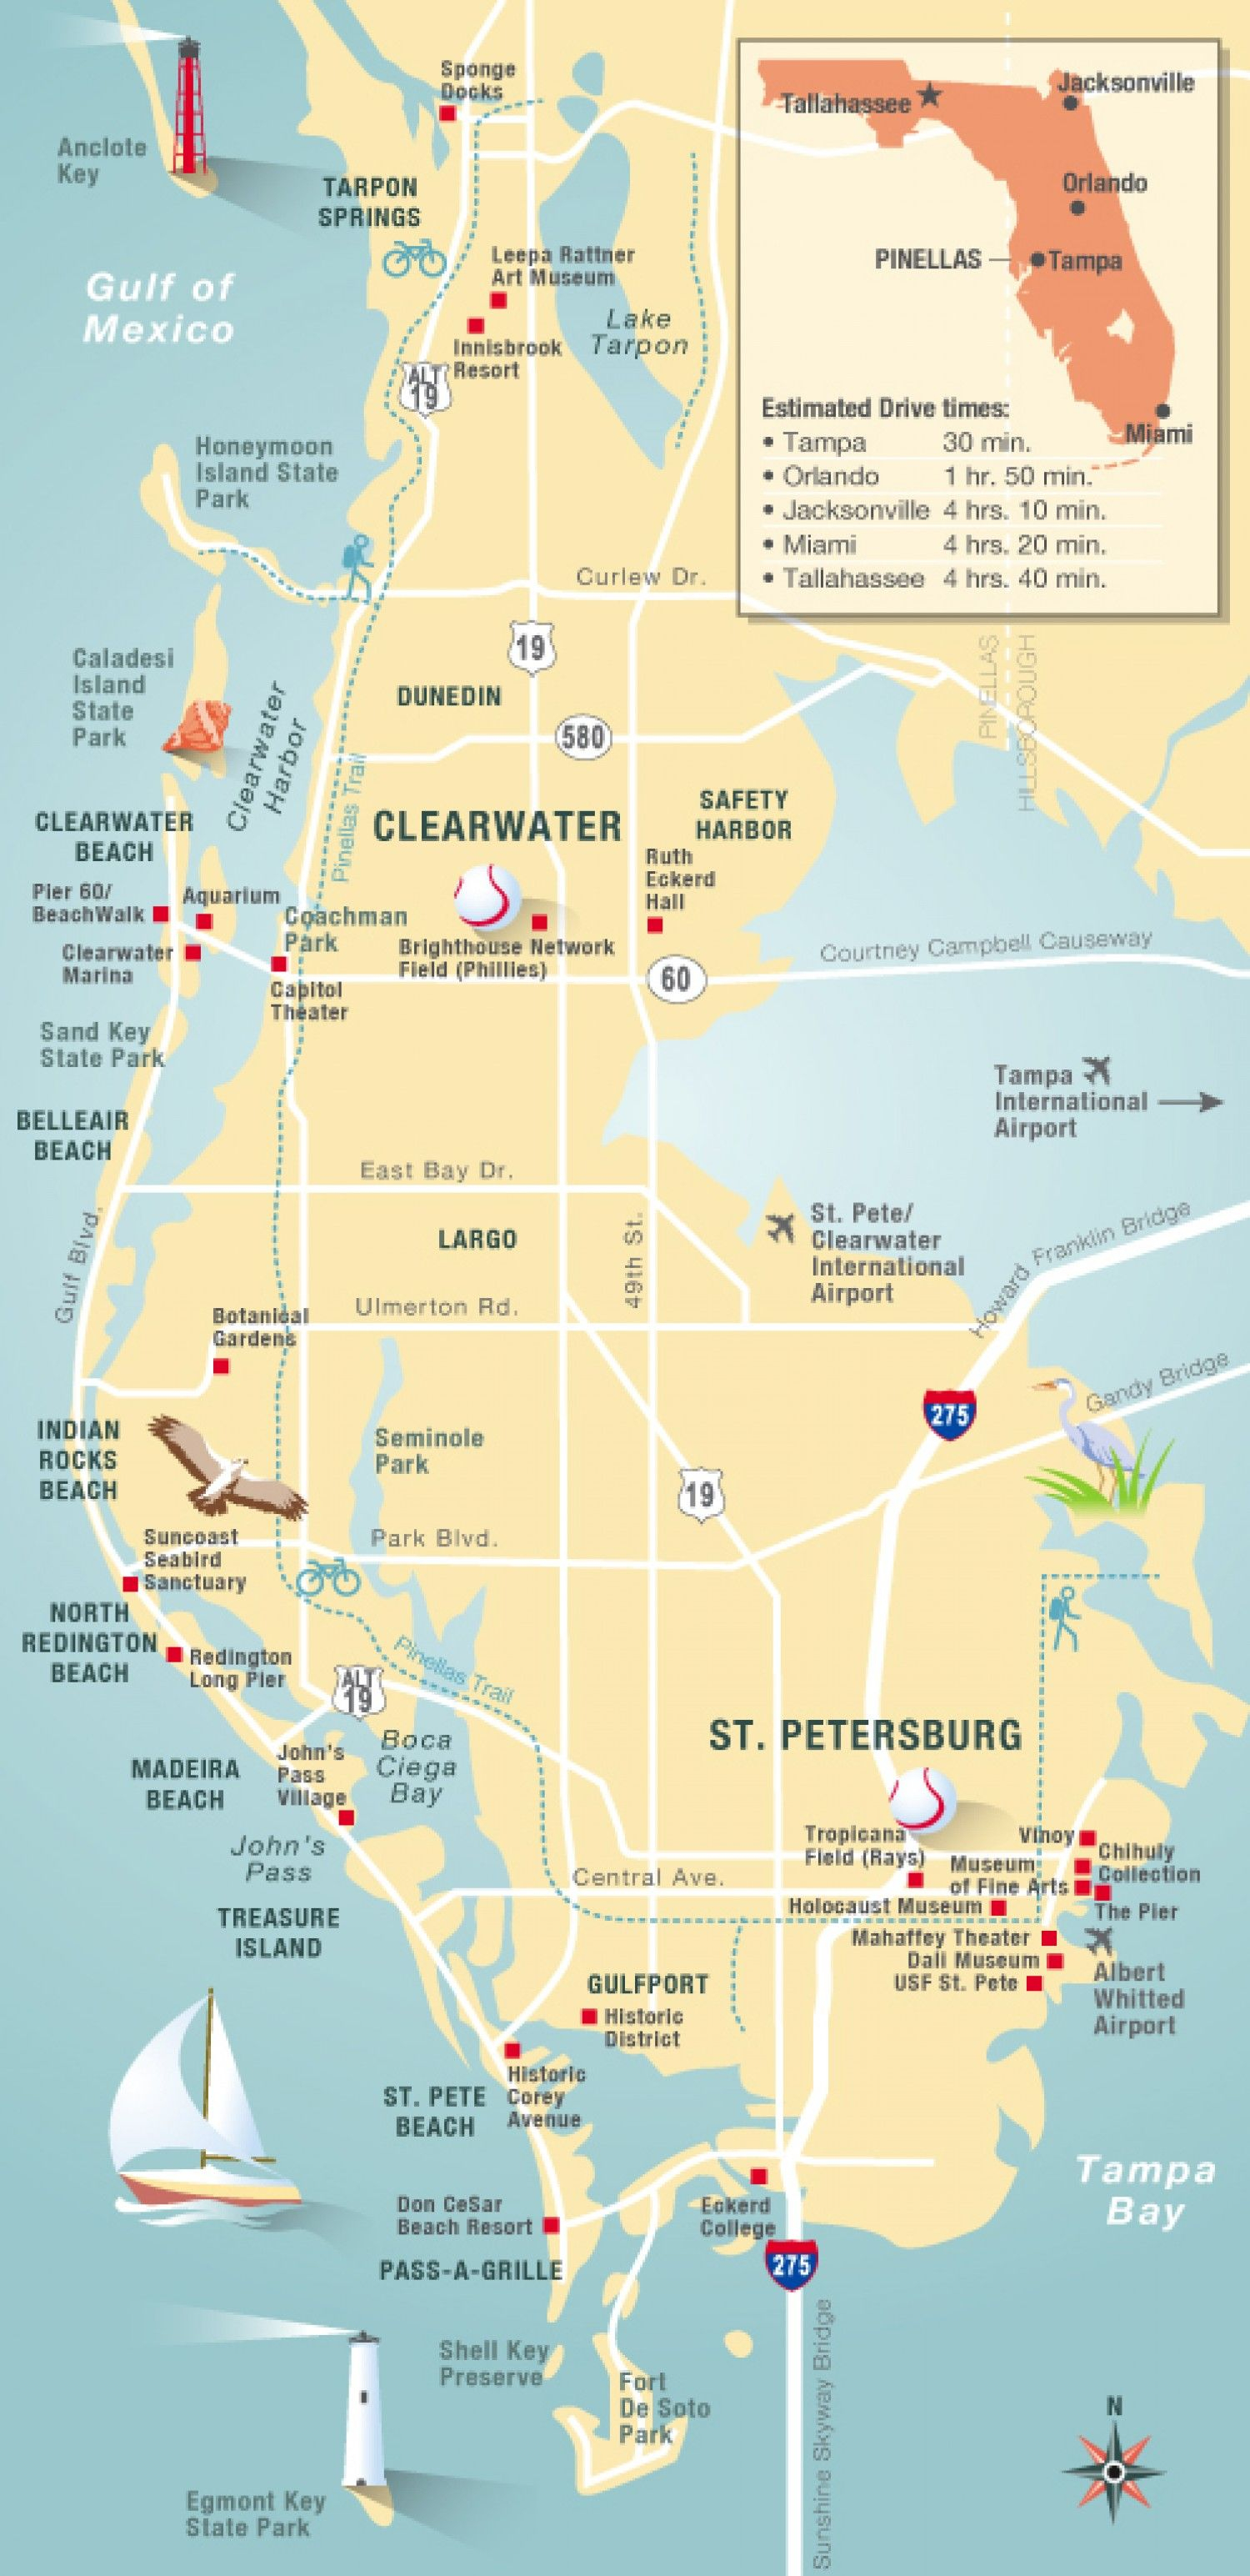 Pinellas County Map Clearwater, St Petersburg, Fl | Travel In 2019 - Clearwater Beach Map Florida